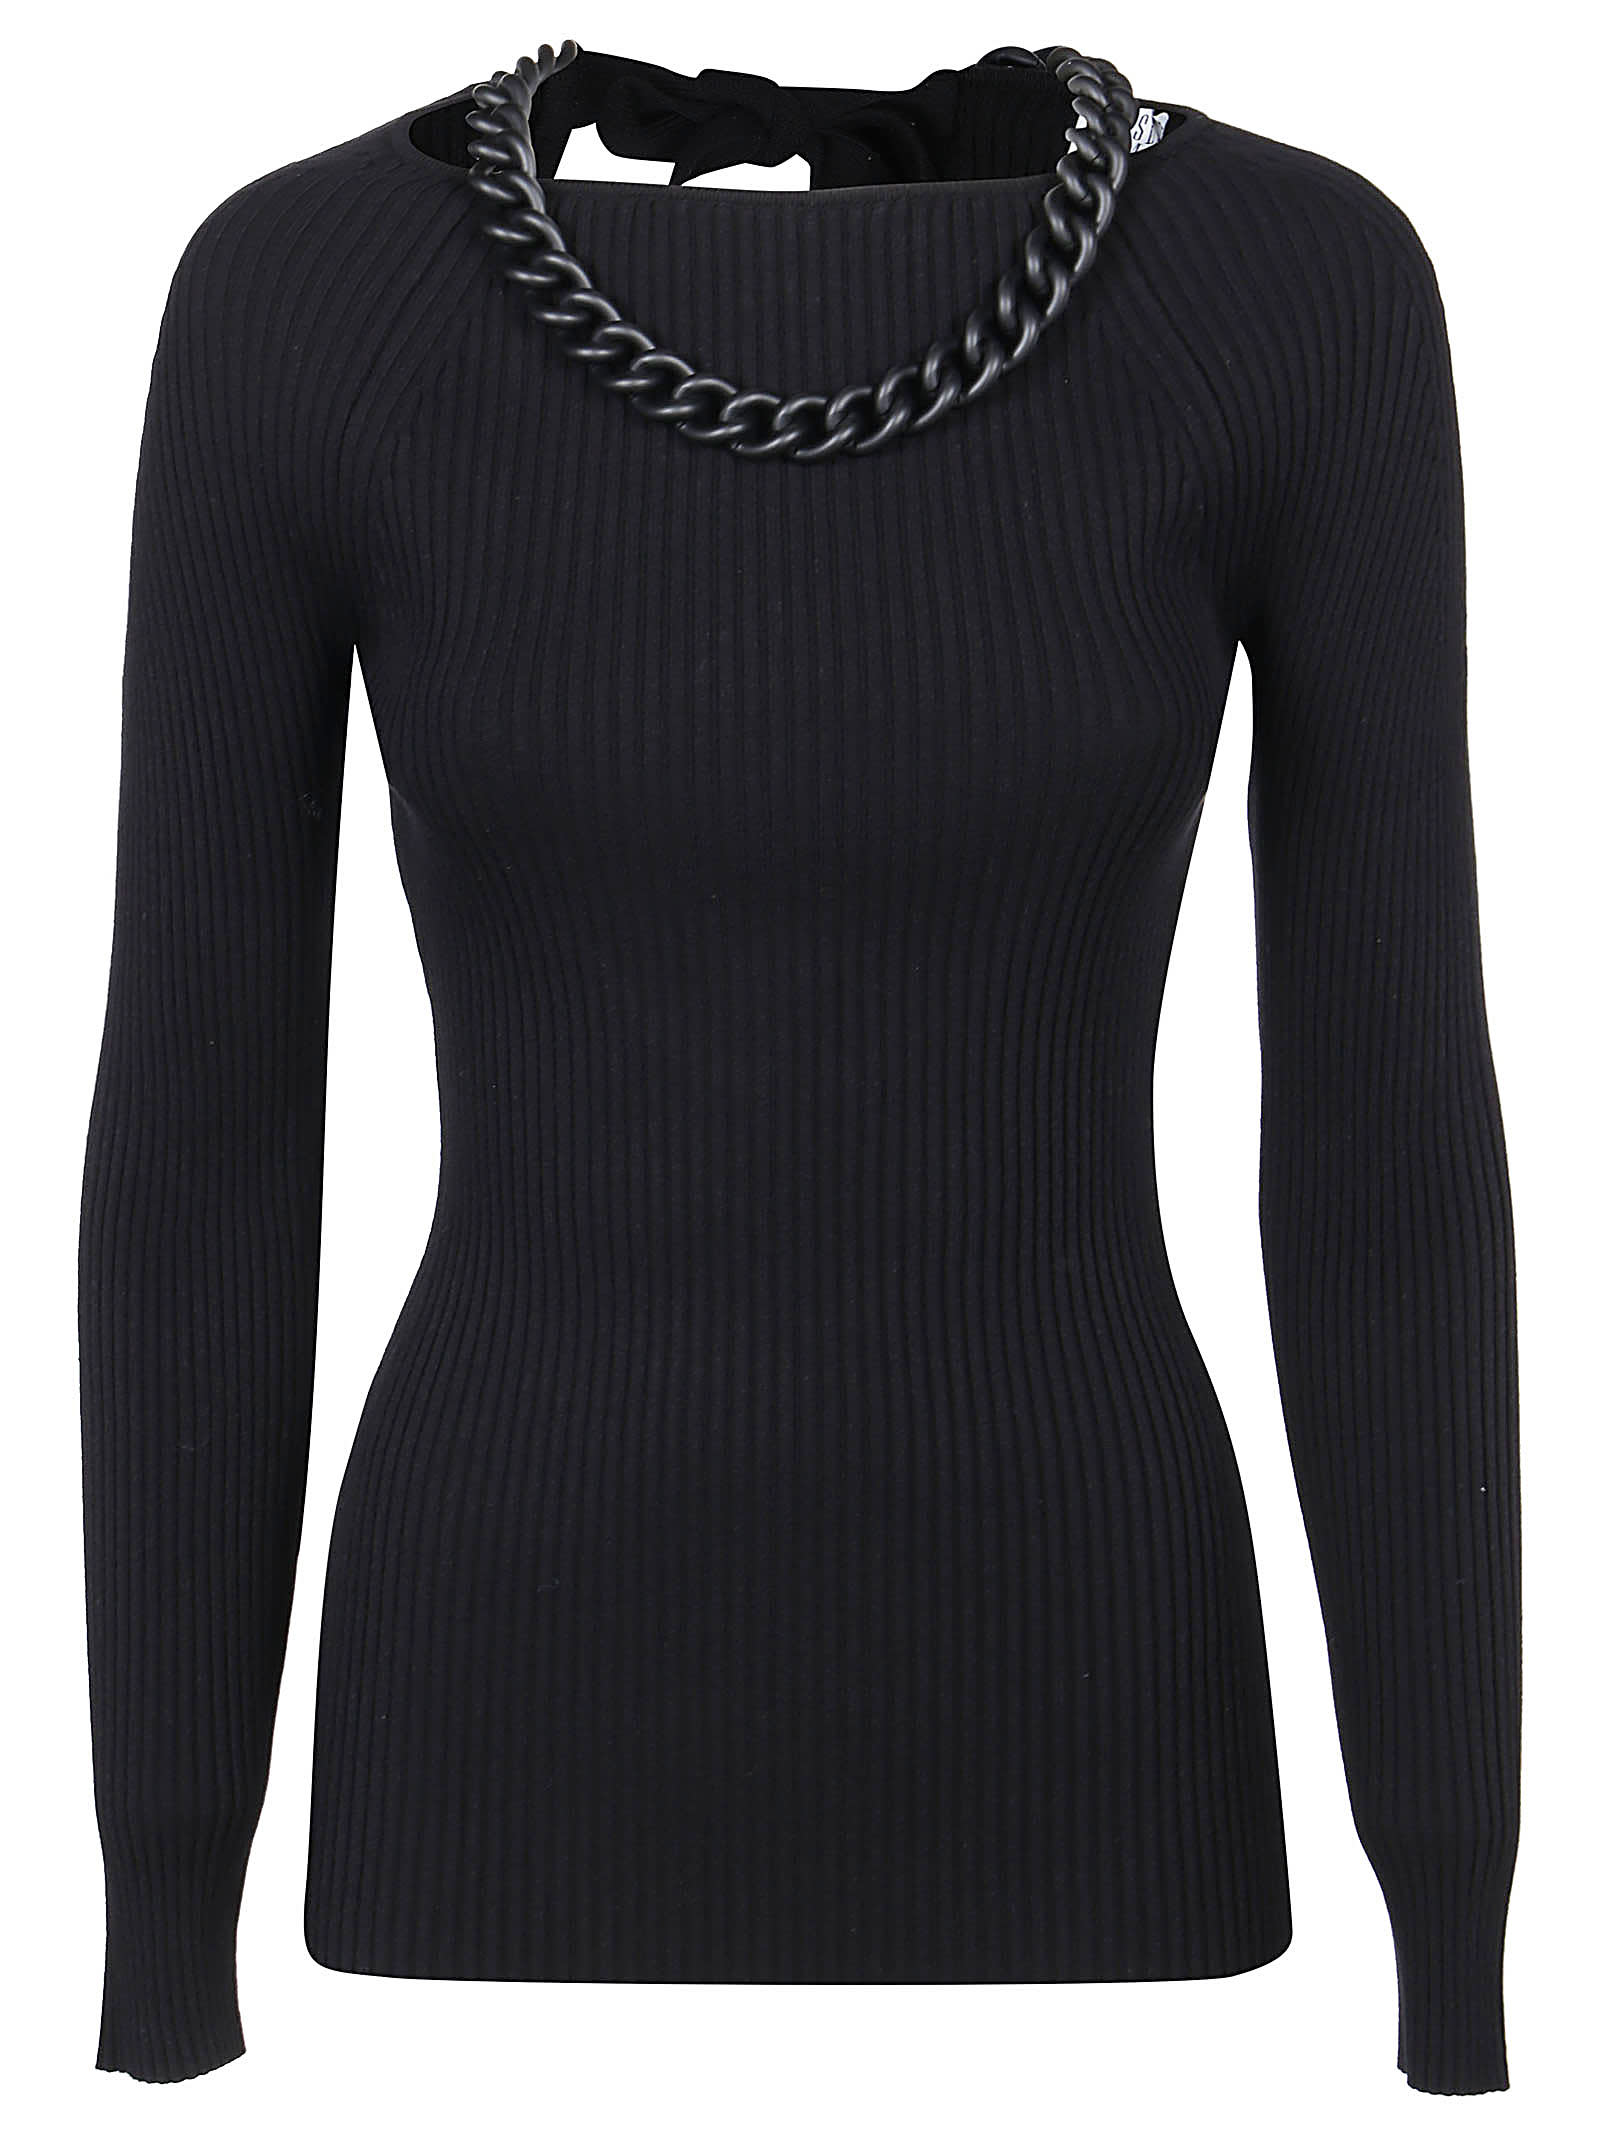 Giuseppe di Morabito Knitted Top With Chain Details